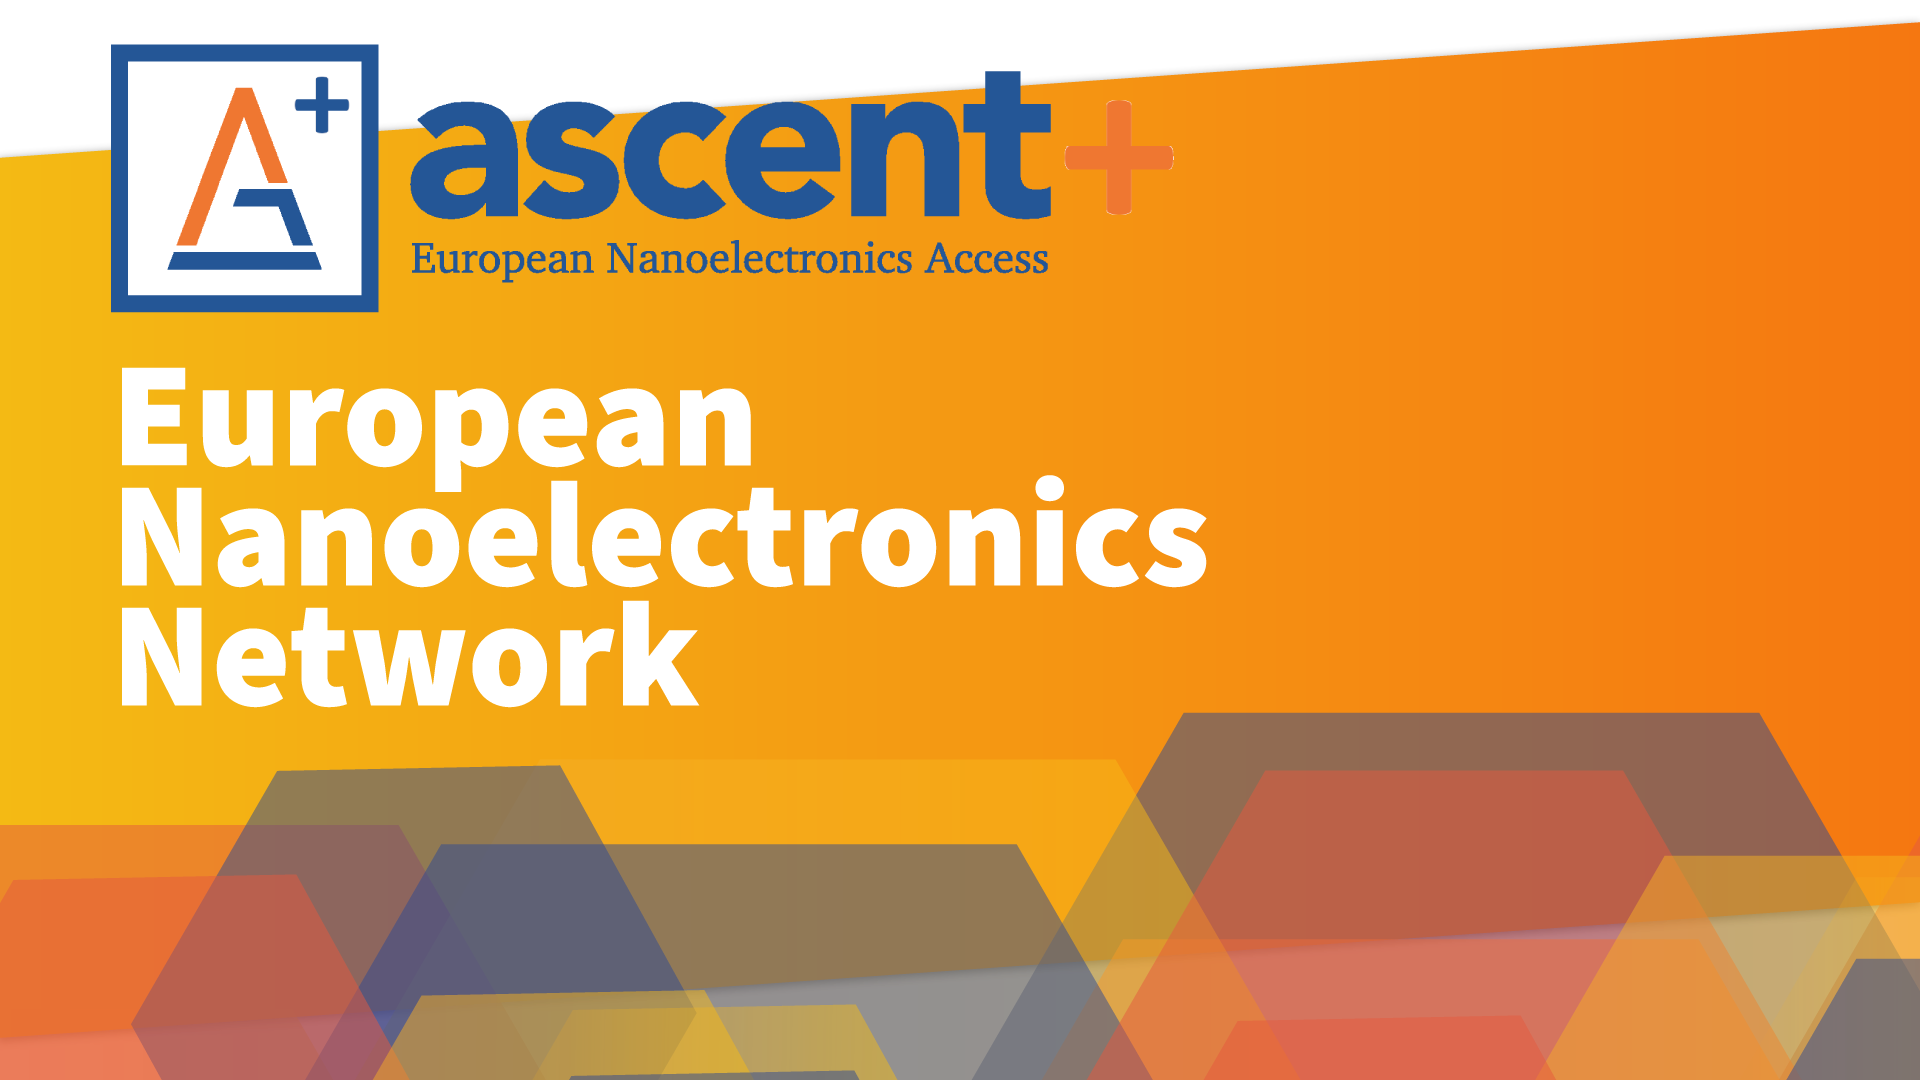 ASCENTPlus promotes better access to Nanoelectronics infrastructures